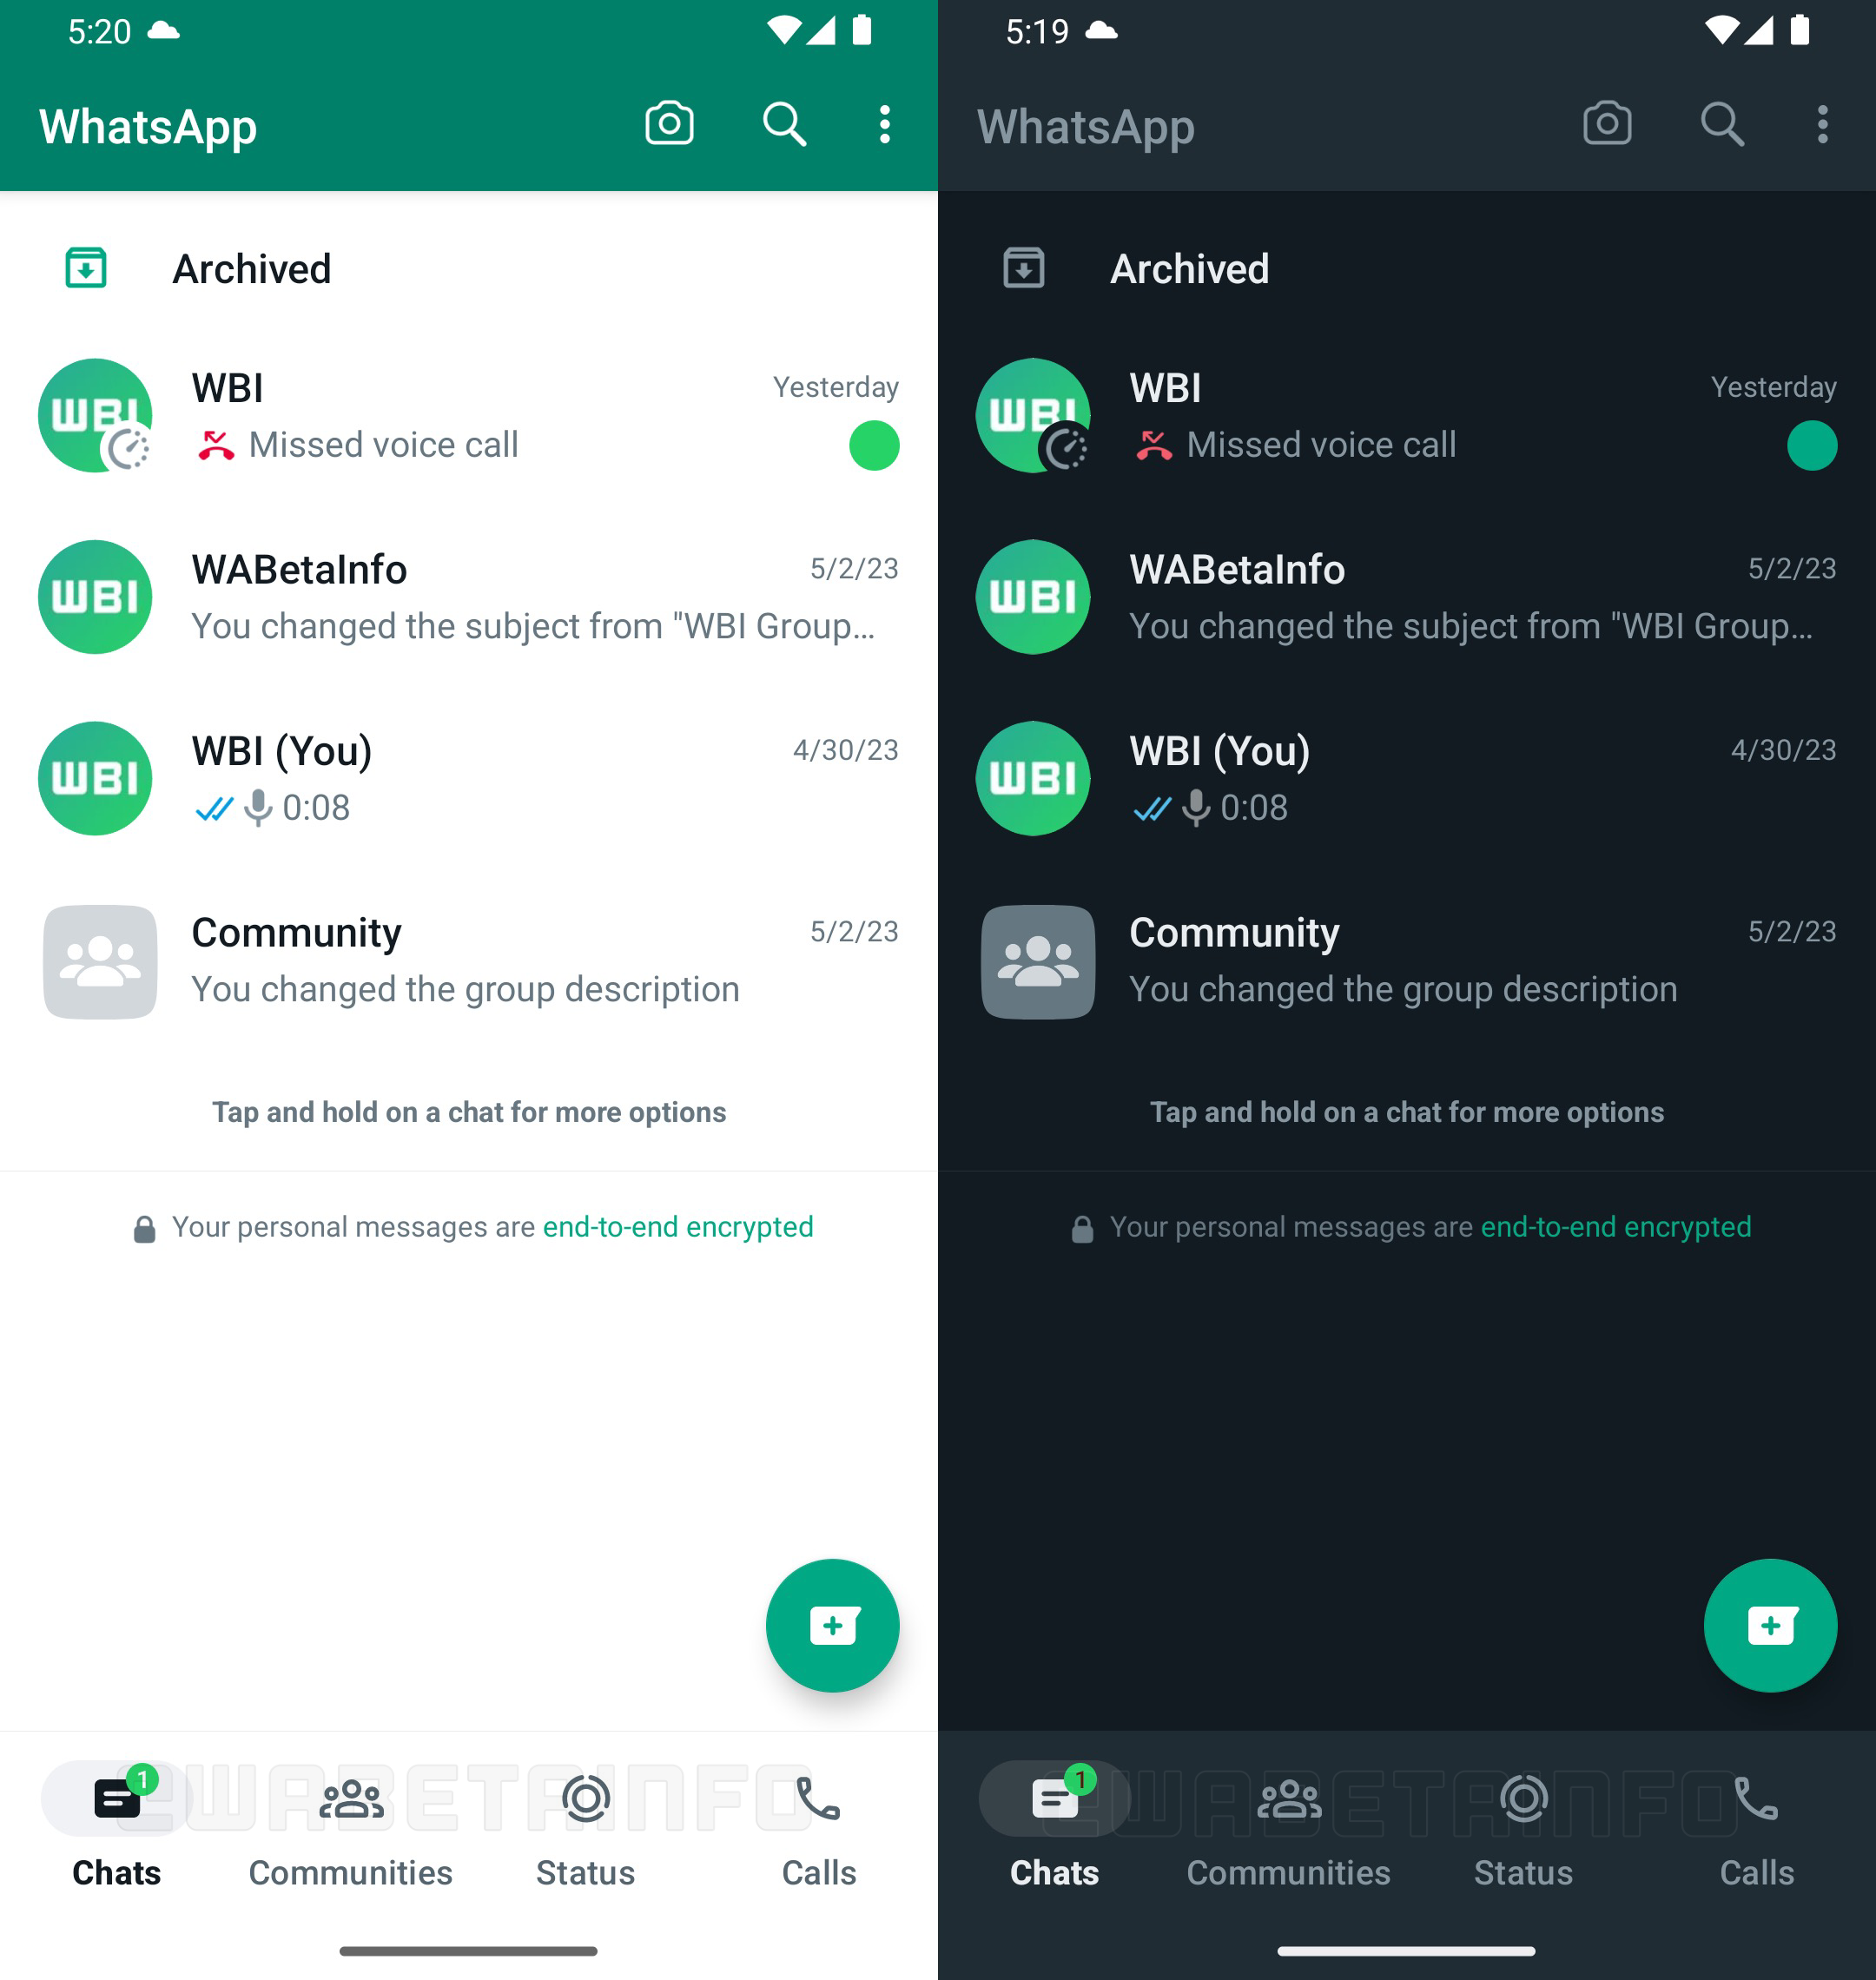 instal the last version for android WhatsApp (2.2338.9.0)